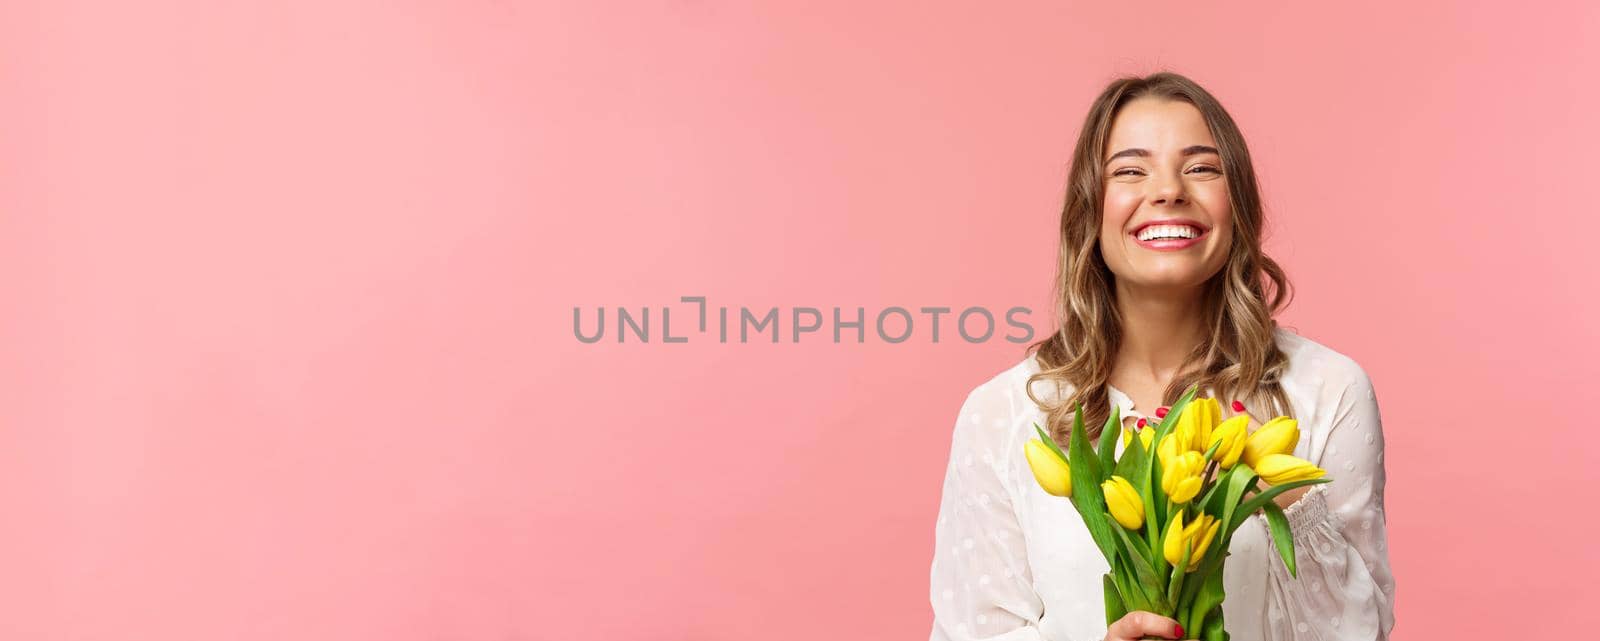 Spring, happiness and celebration concept. Close-up of happy and carefree blond european girl receive beautiful bouquet of flowers, holding yellow tulips, smiling and laughing, pink background.